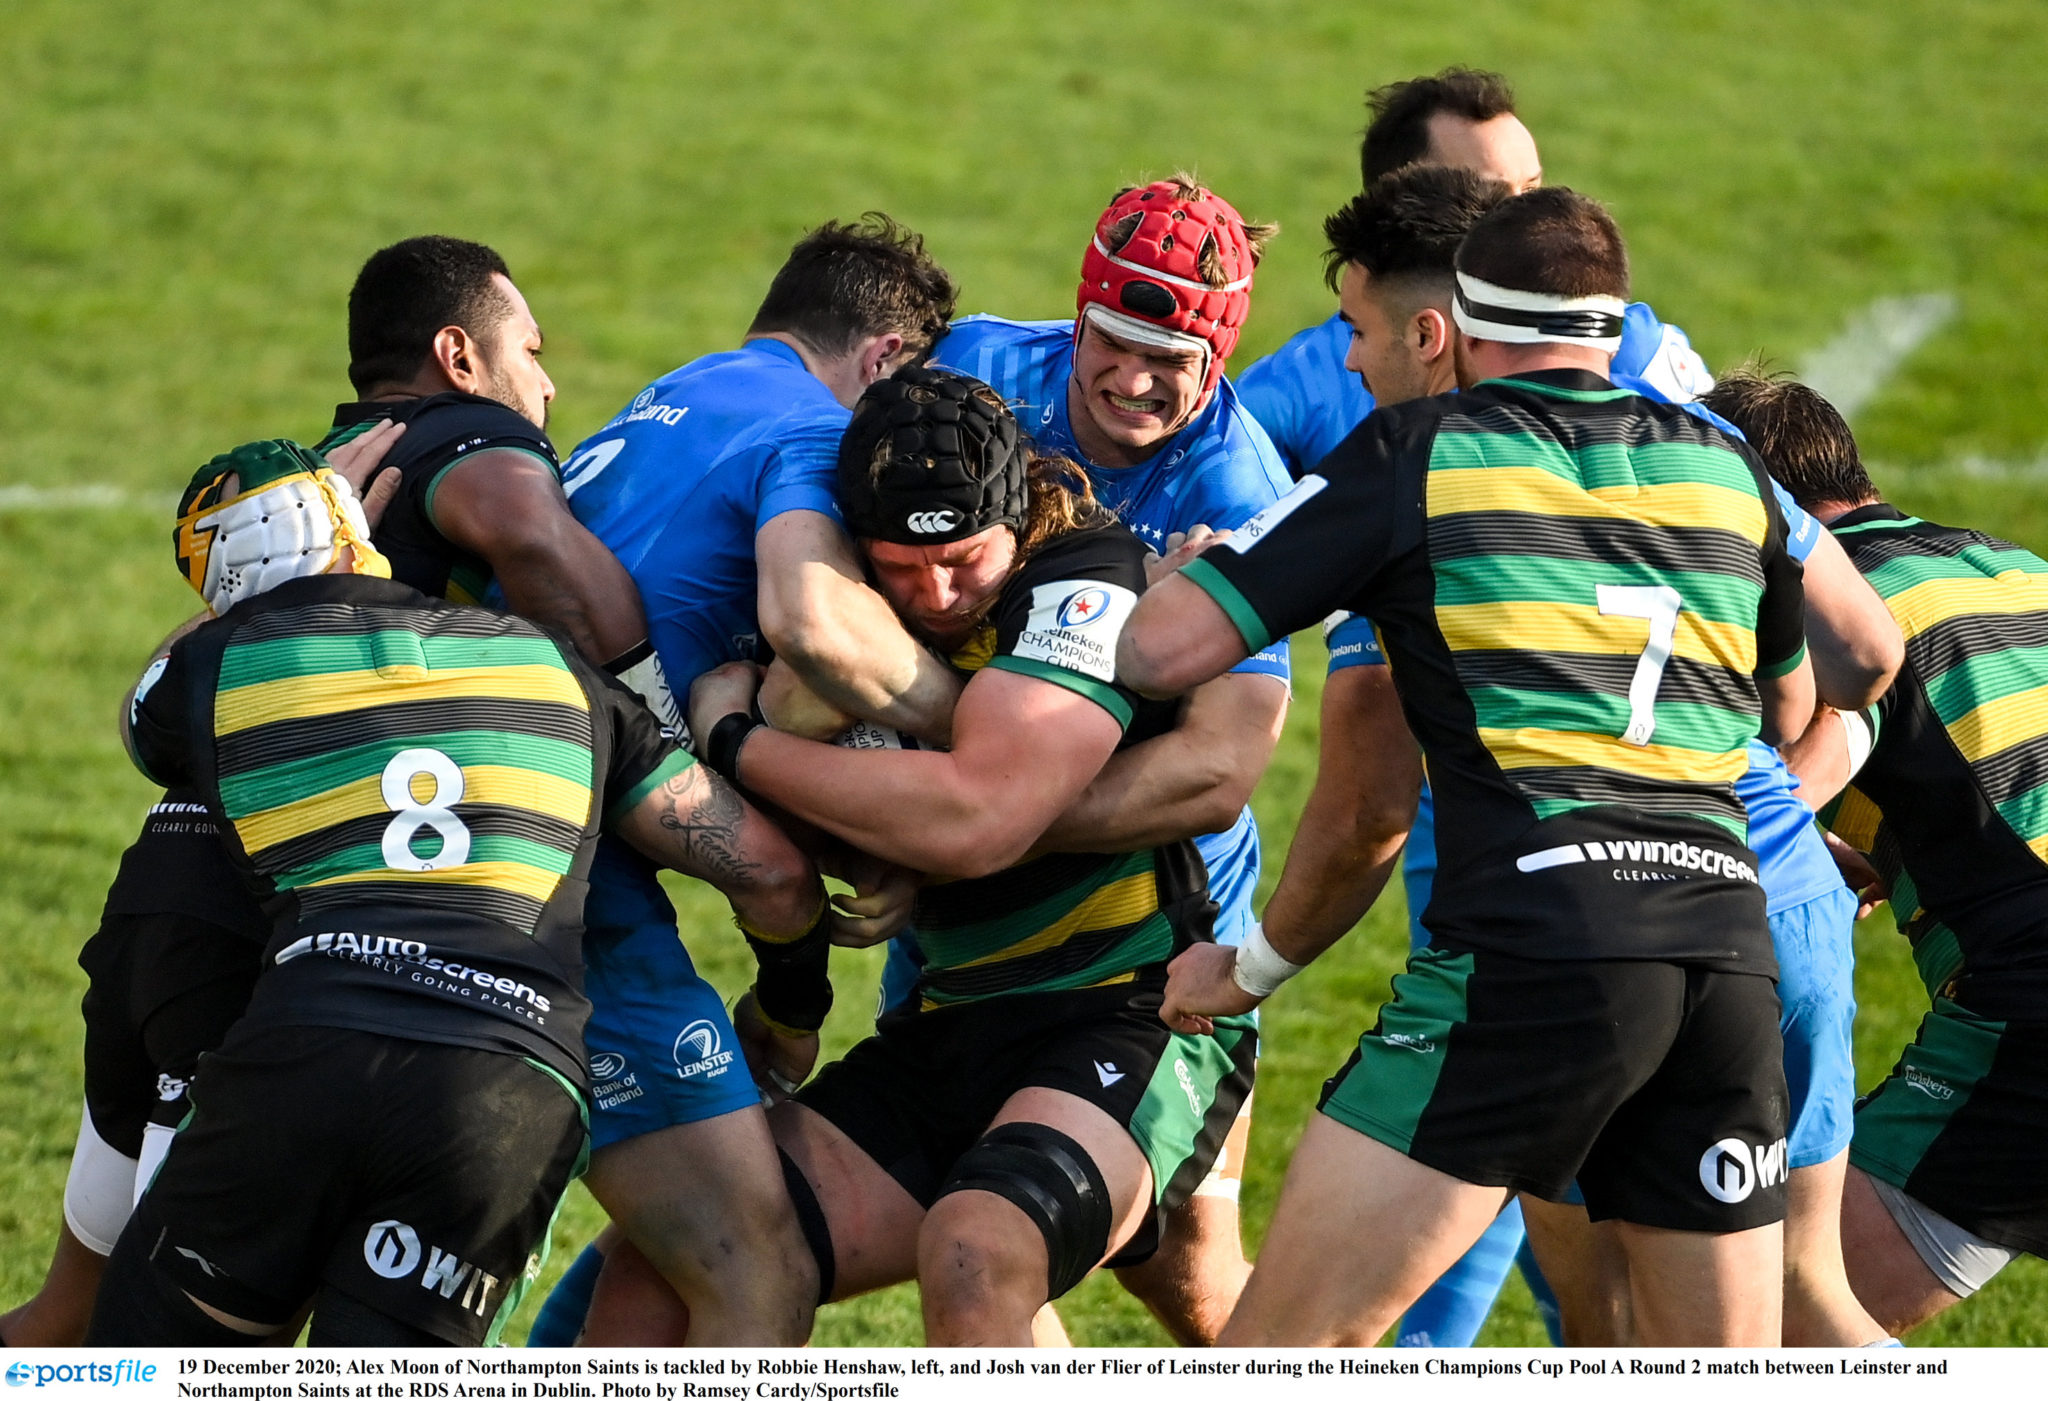 Rugby match between Leinster and Northampton